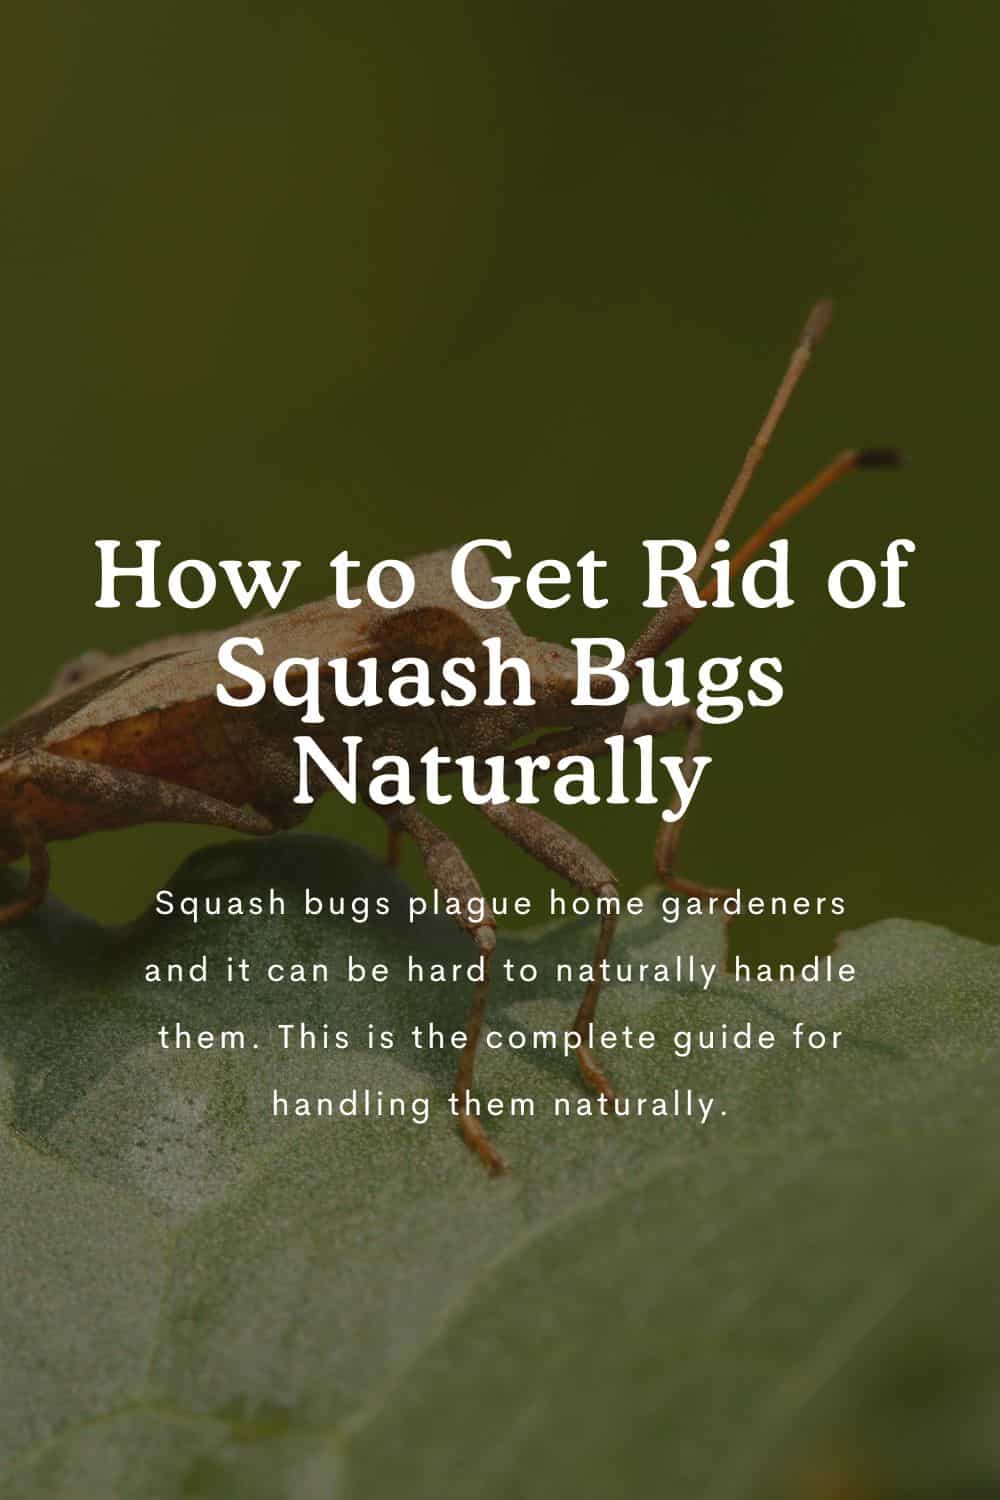 How to get rid of squash bugs naturally